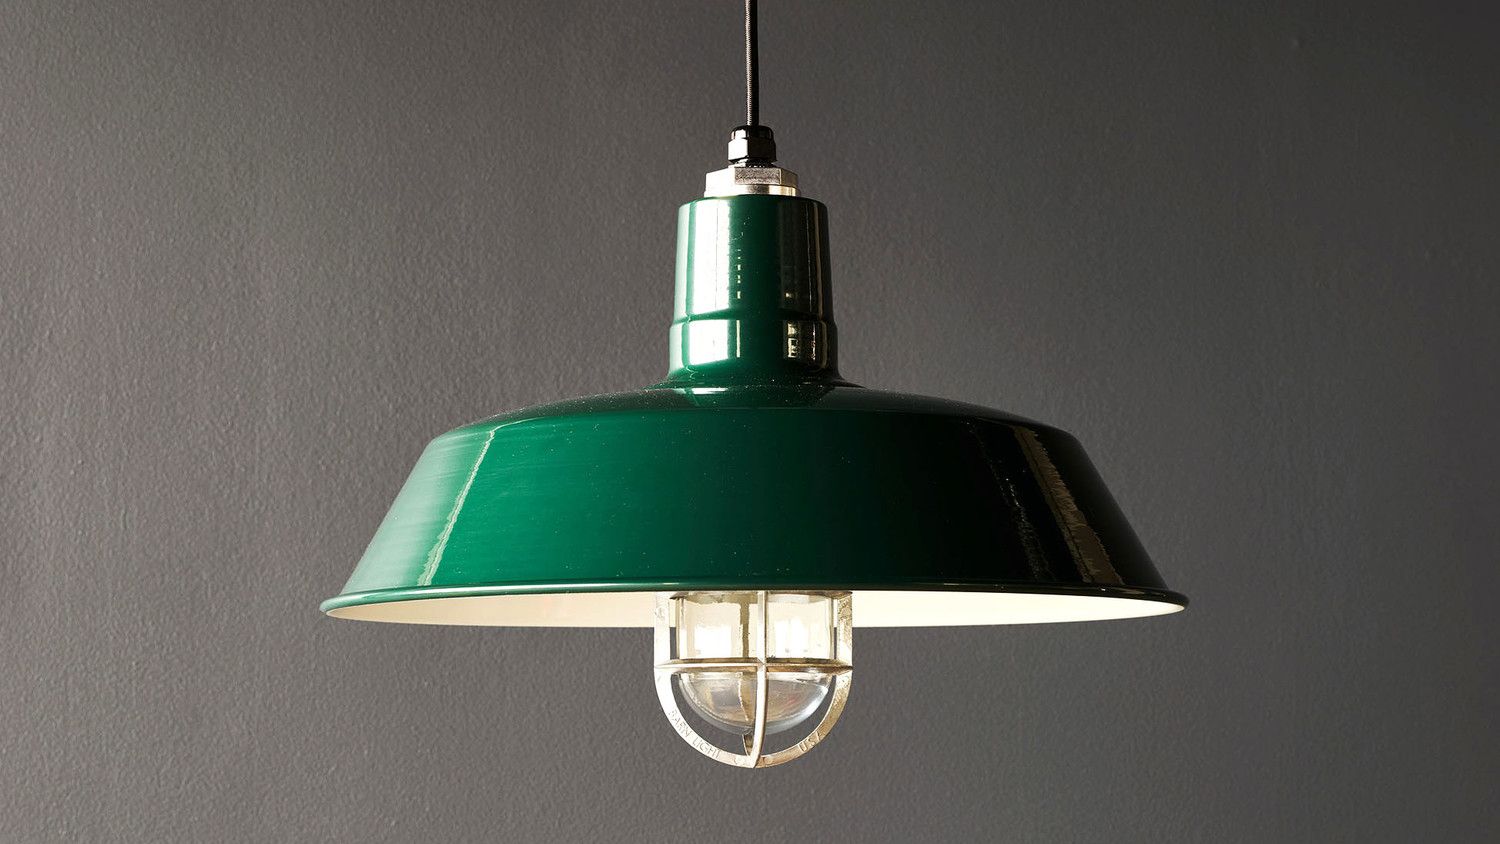 Special Prices On Hamilton 1 Light Single Dome Pendant Inside Hamilton 1 Light Single Dome Pendants (View 30 of 30)